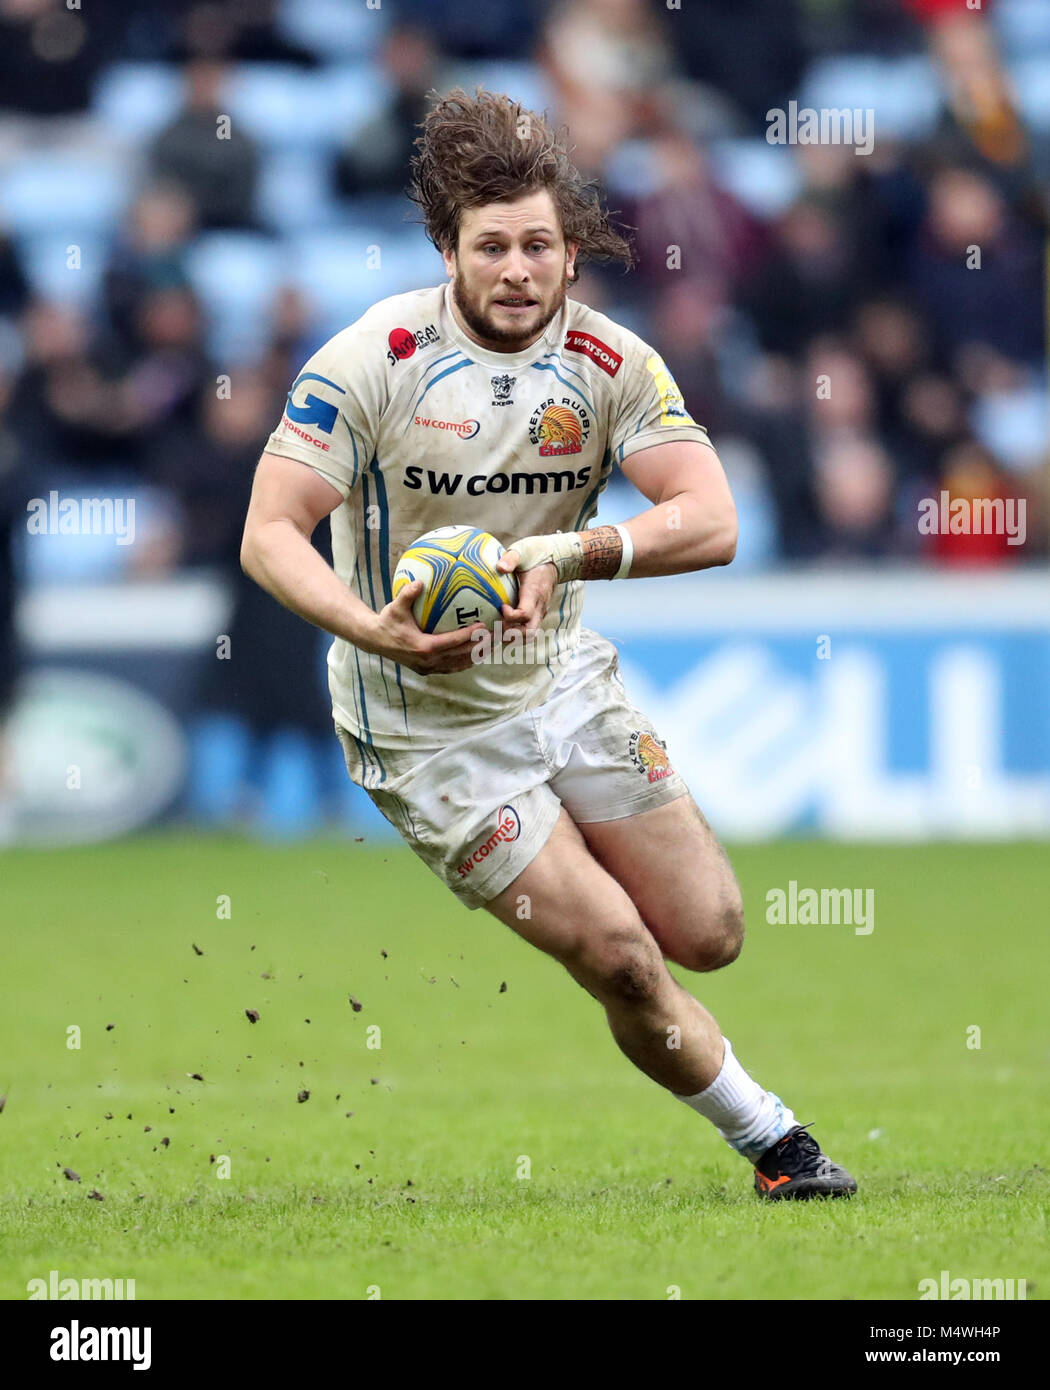 Exeter Chiefs' Alec Hepburn during the Aviva Premiership match at the Ricoh  Arena, Coventry. PRESS ASSOCIATION Photo. Picture date: Sunday February 18,  2018. See PA story RUGBYU Wasps. Photo credit should read: